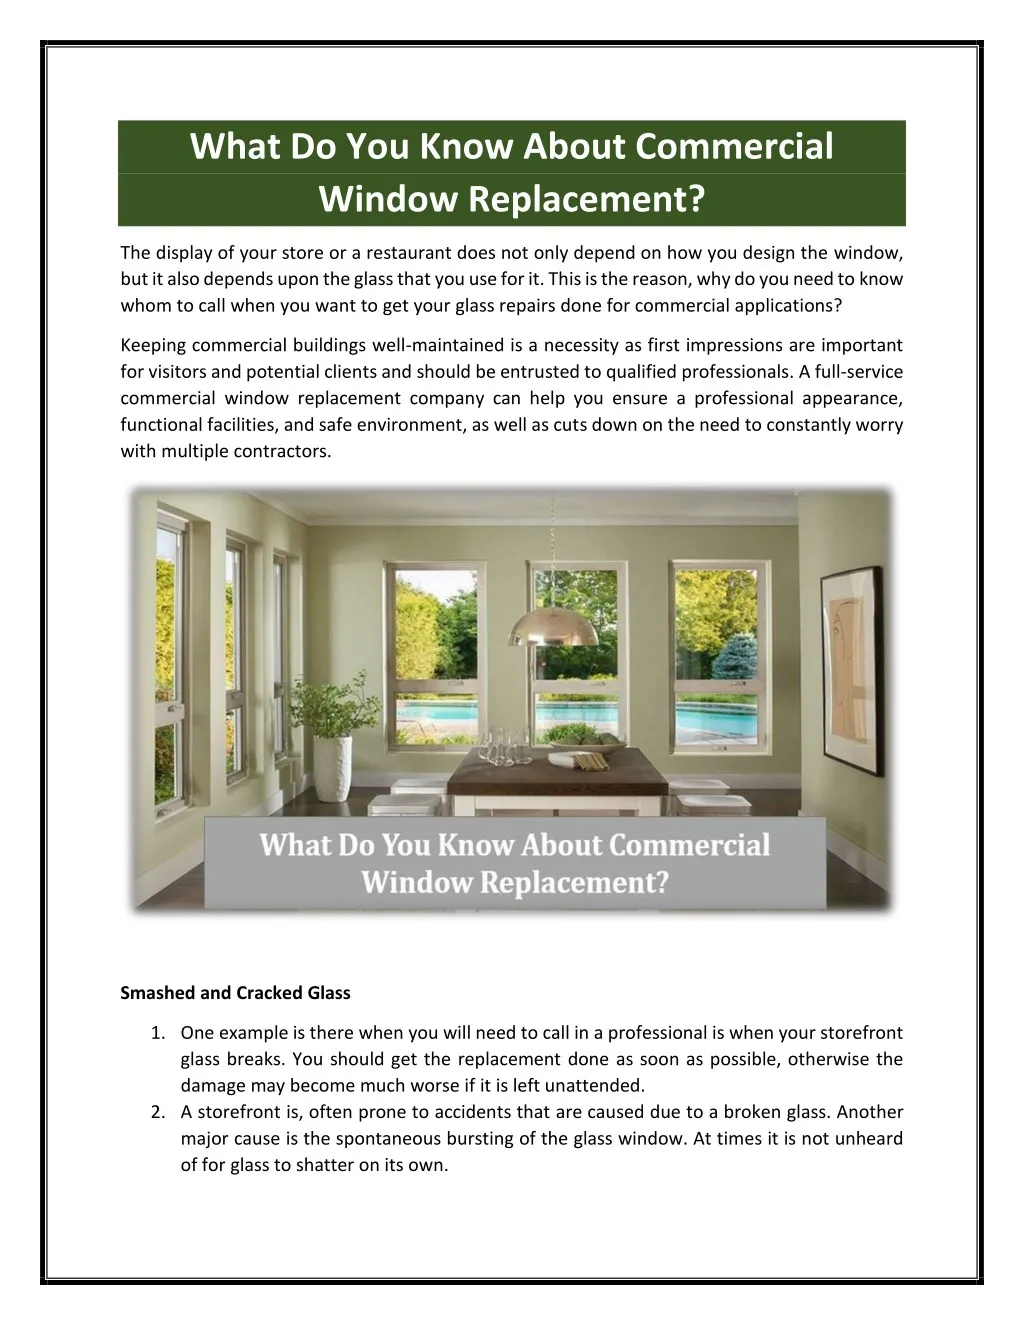 what do you know about commercial window